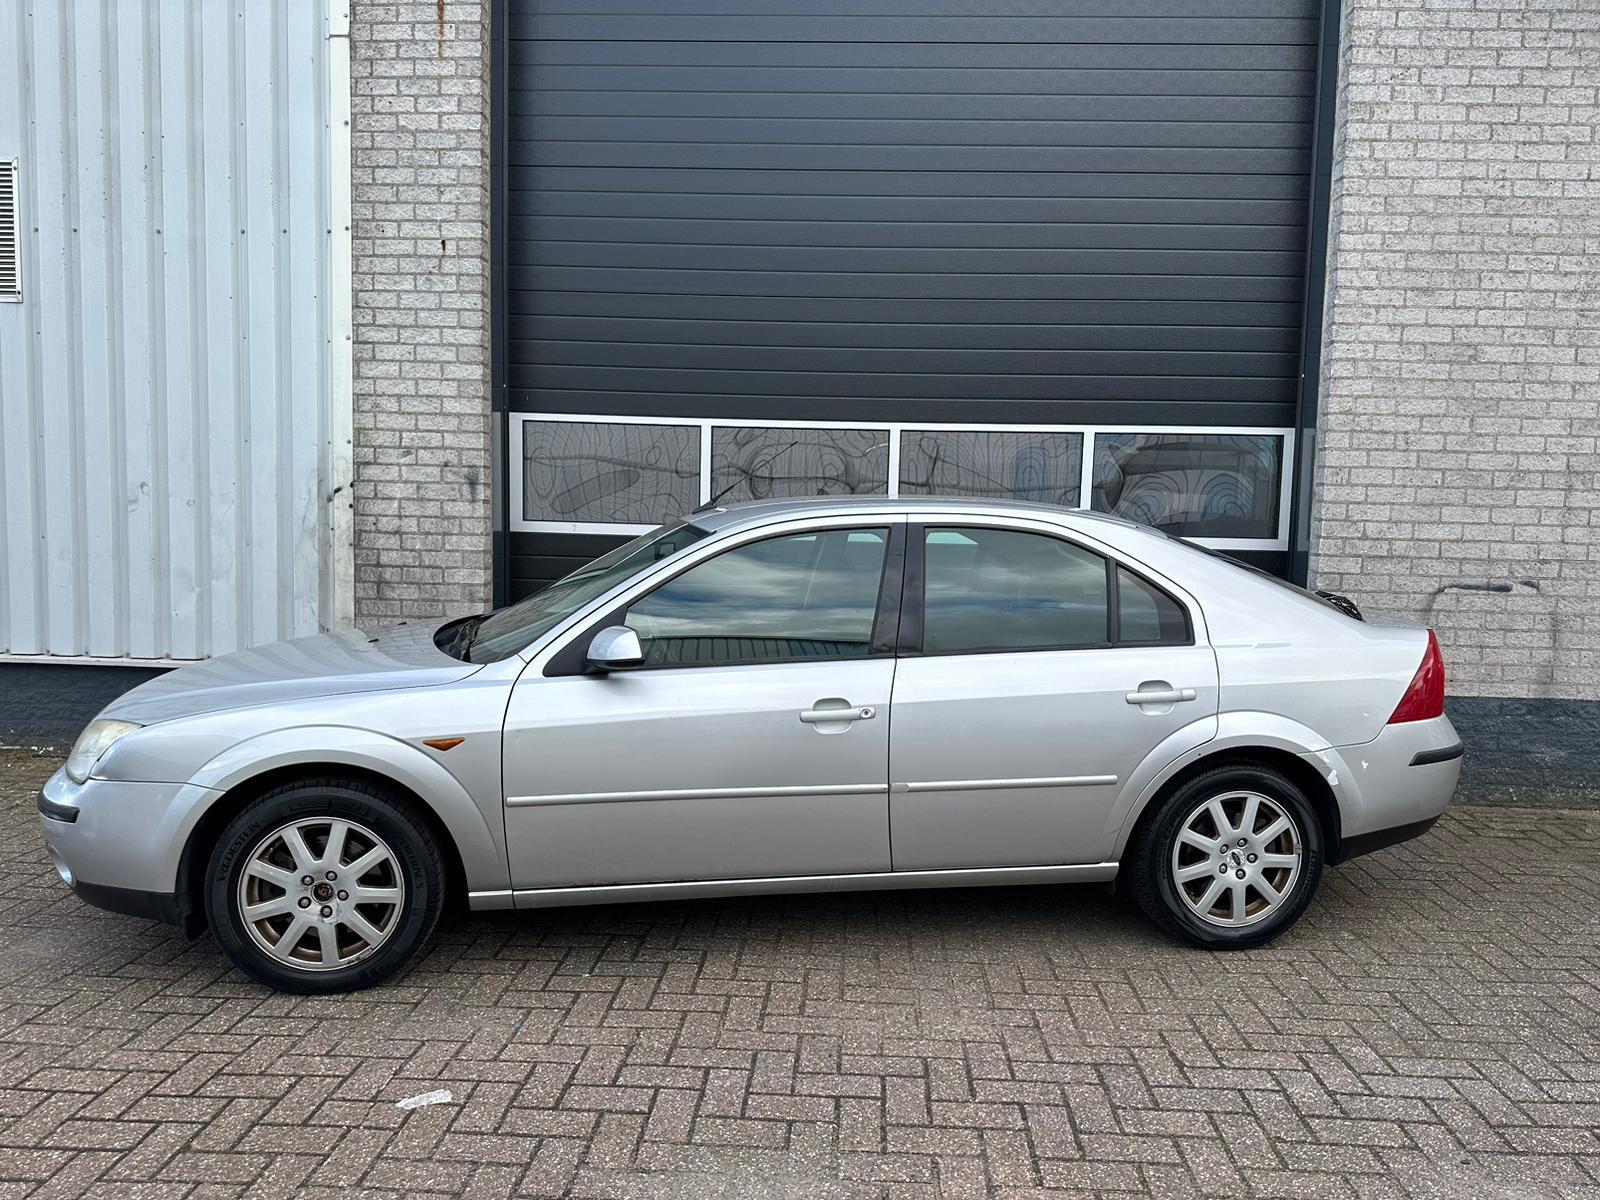 ford-mondeo-image3.jpg